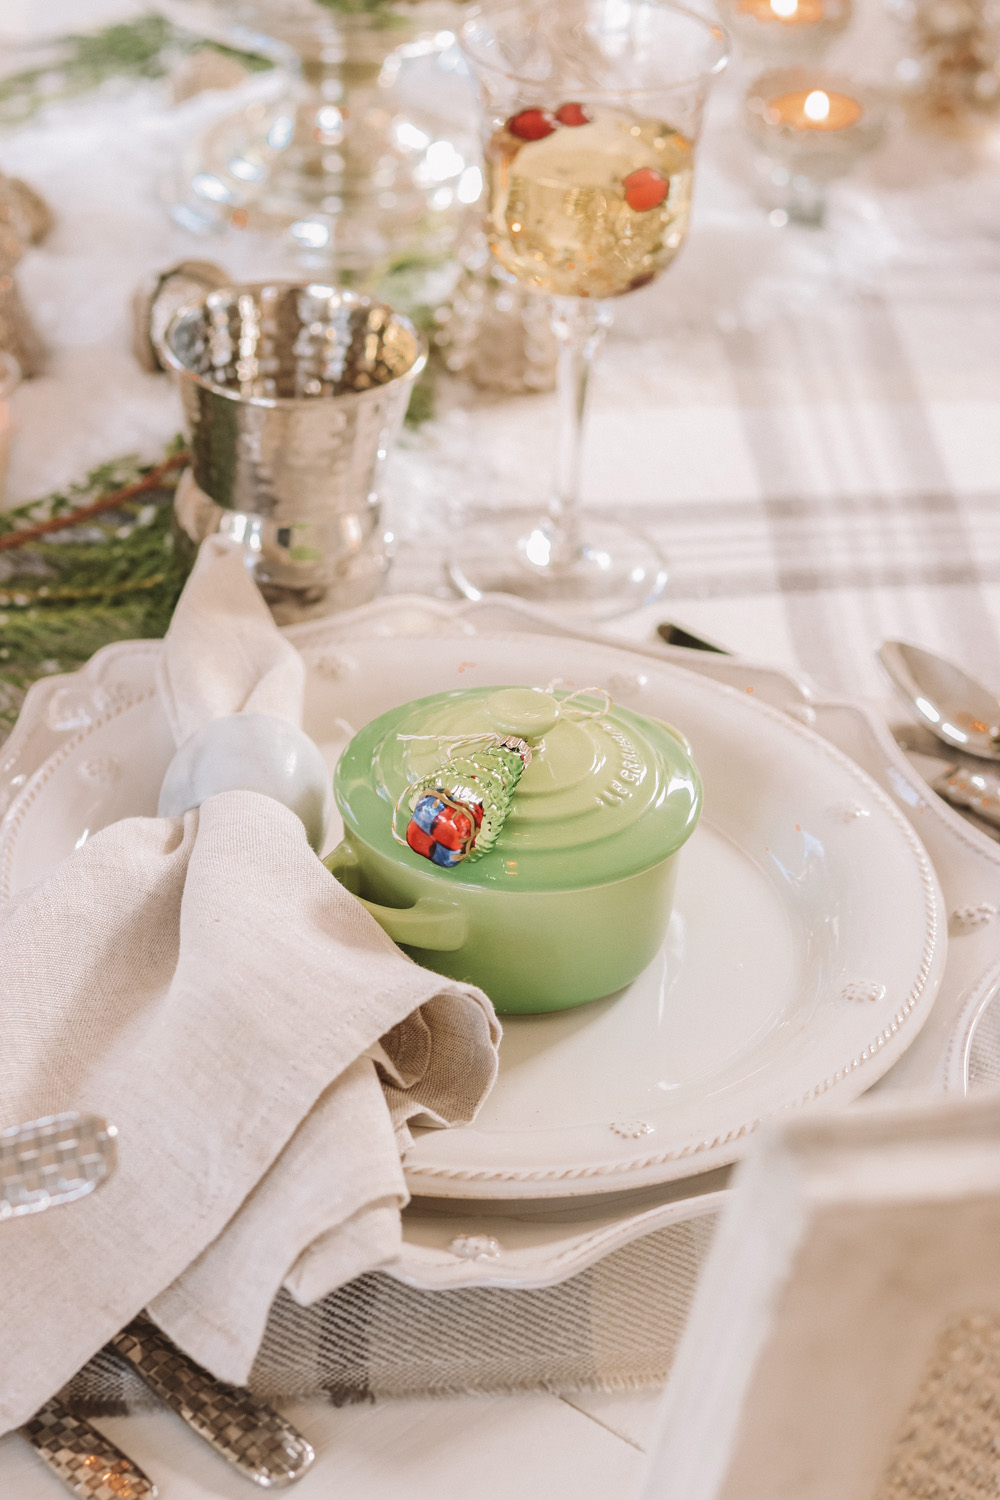 Christmas Dinner Party and Cookware Gift Ideas